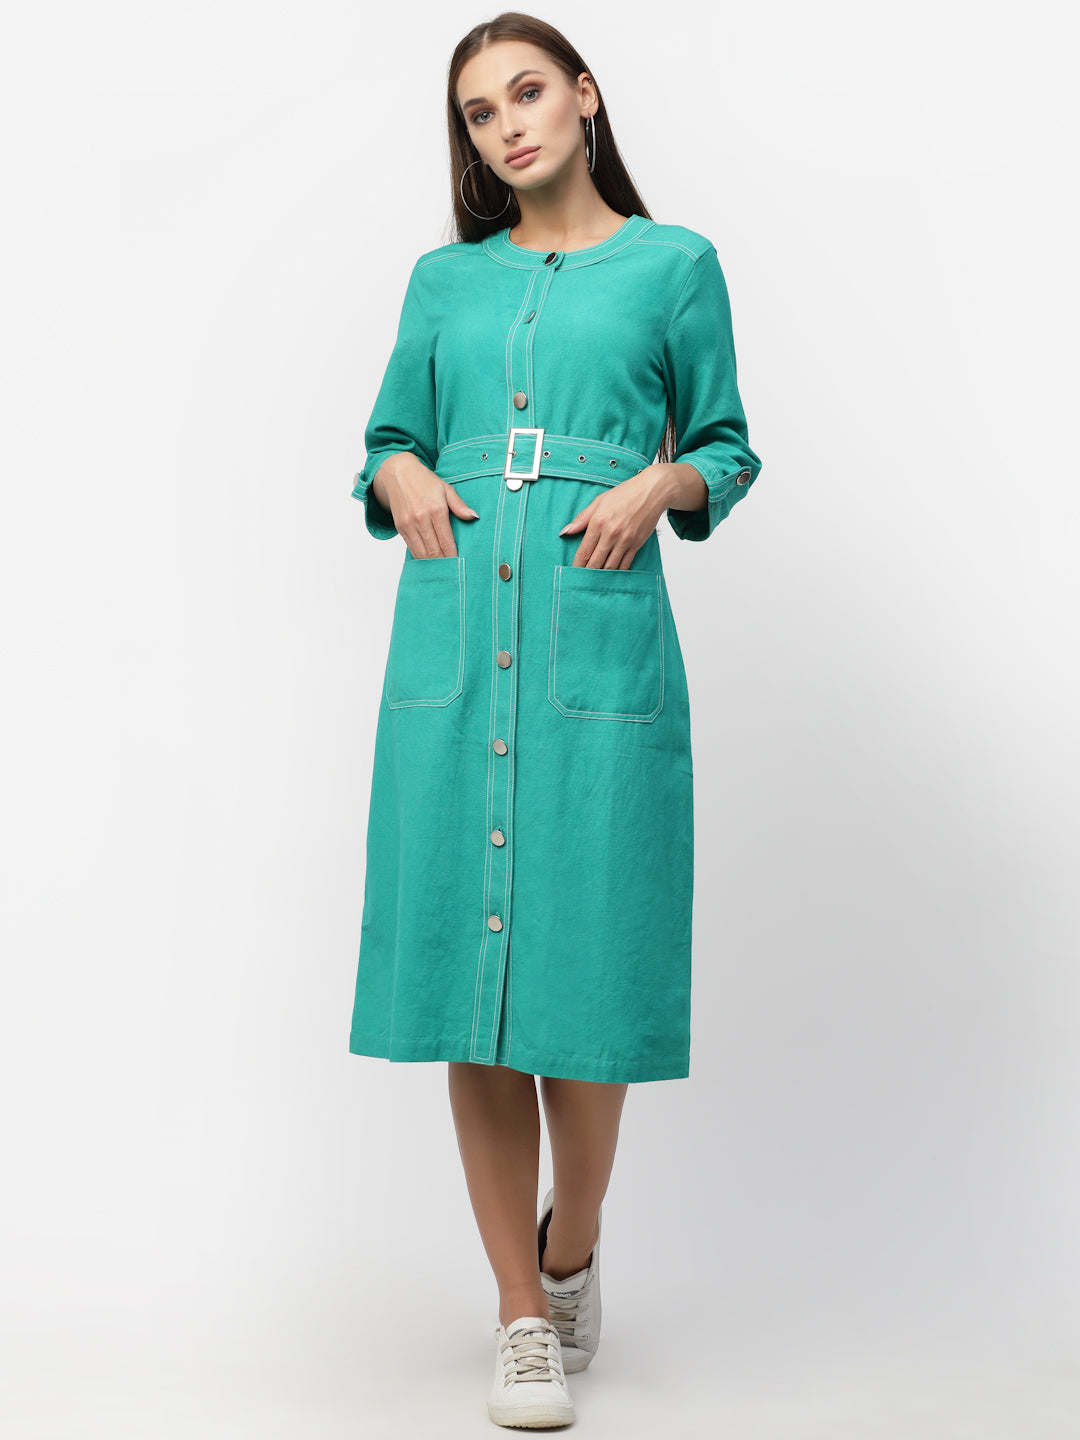 Blanc9 Green With Silver Buckle Belt Dress-B9DR118